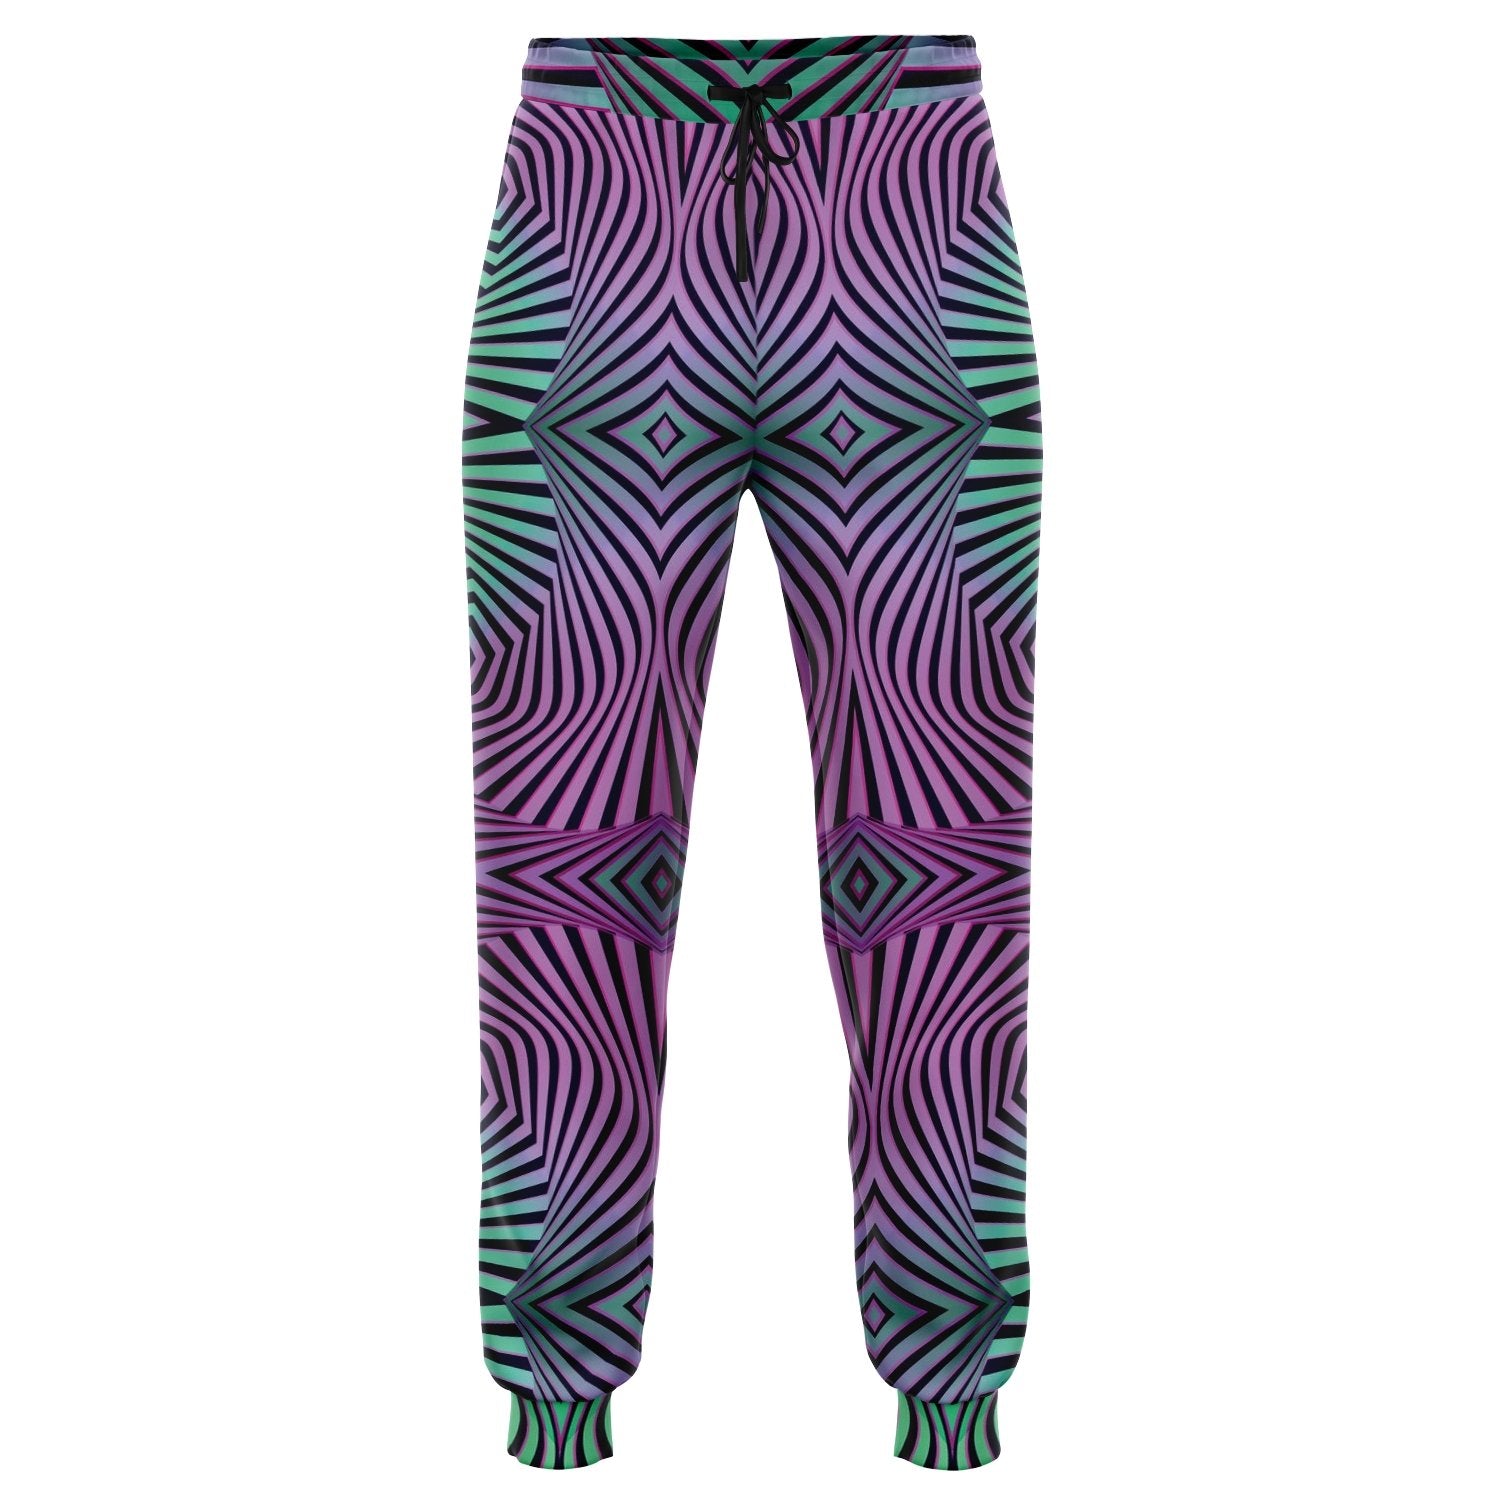 EDM Trippy DMT Psychedelic Funky Geometric Festival Illusion Joggers